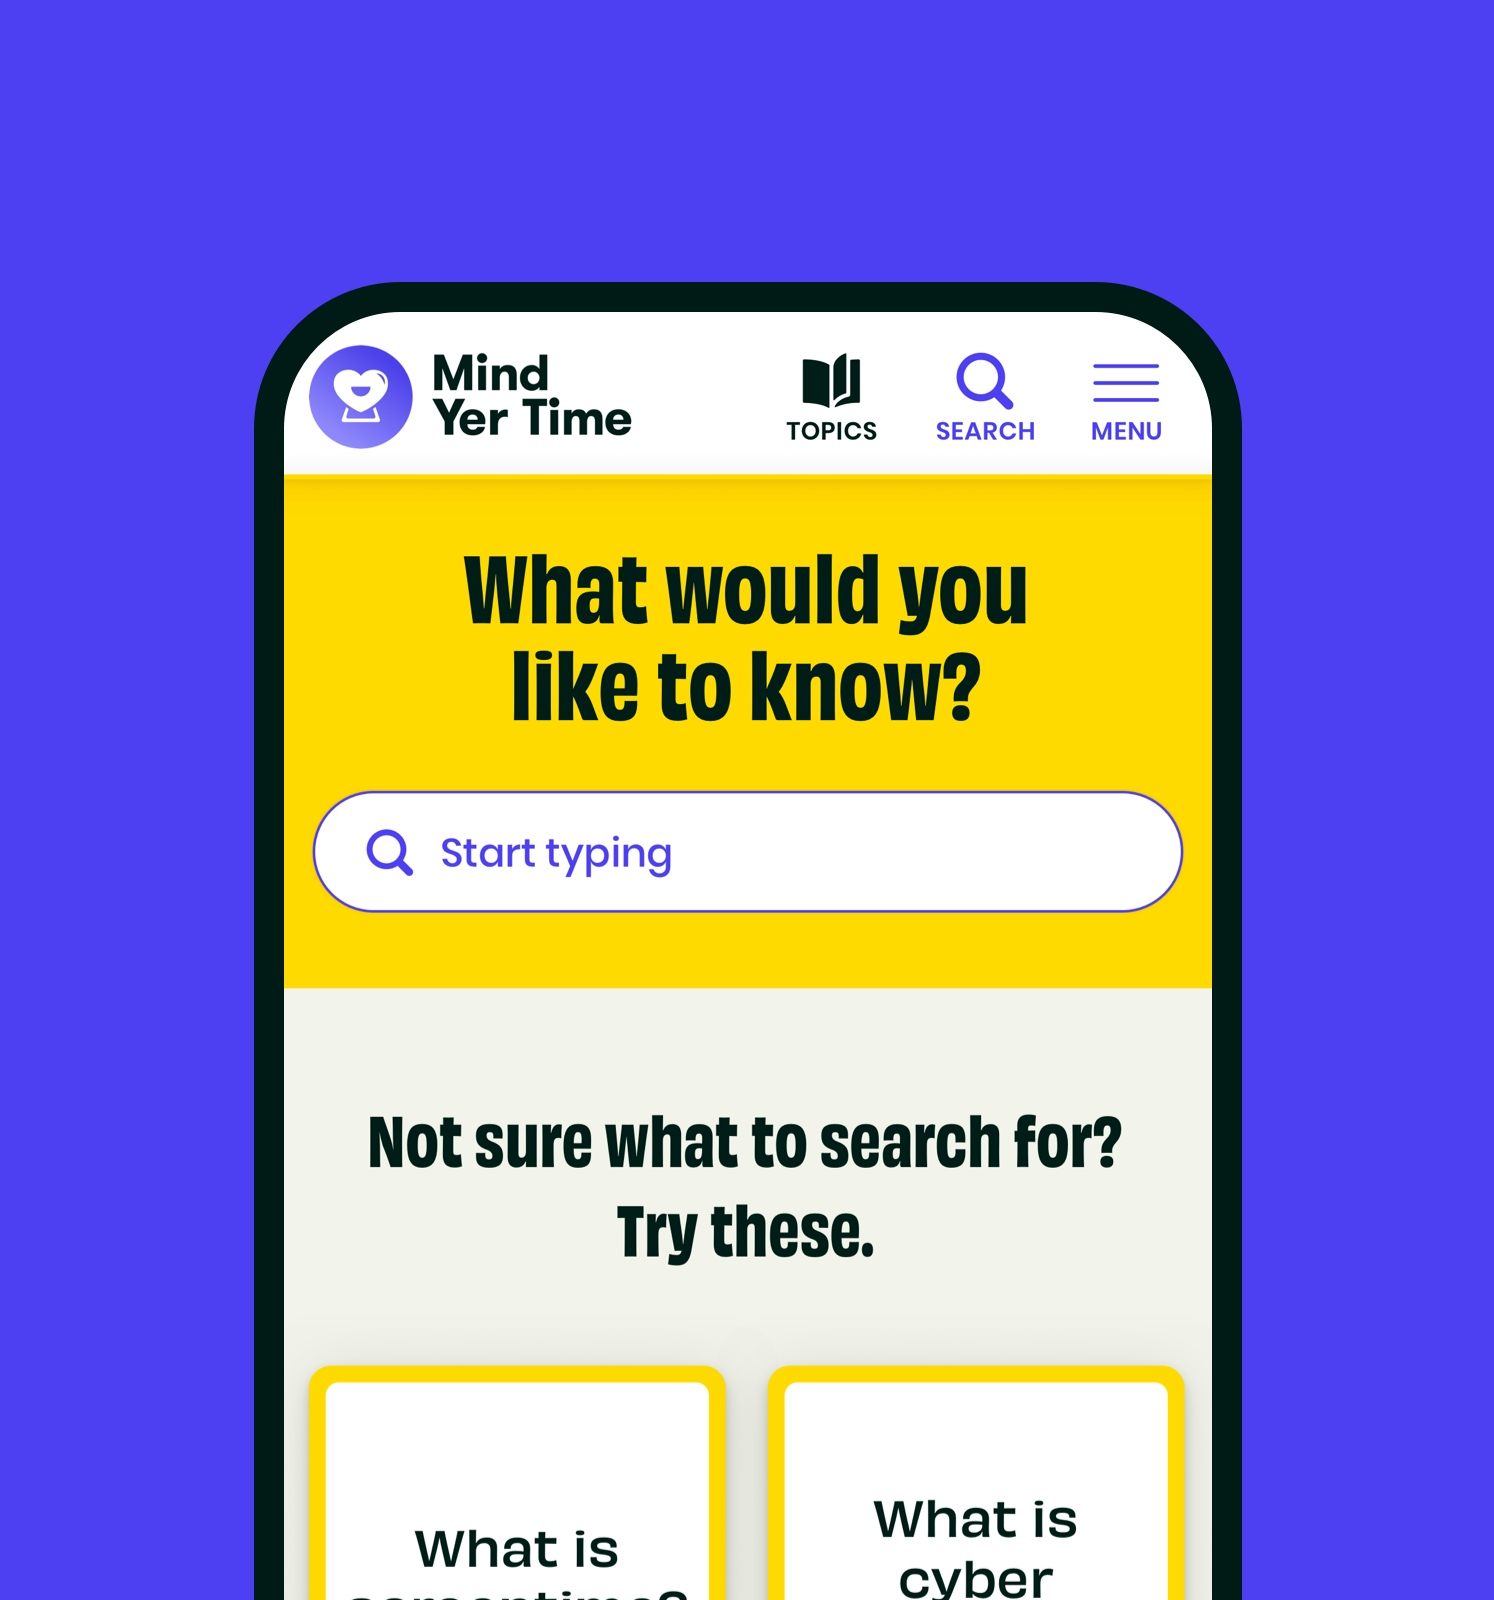 A mobile phone depicts a screenshot of the Mind yer Time page “What would you like to know?” sit on a navy blue background